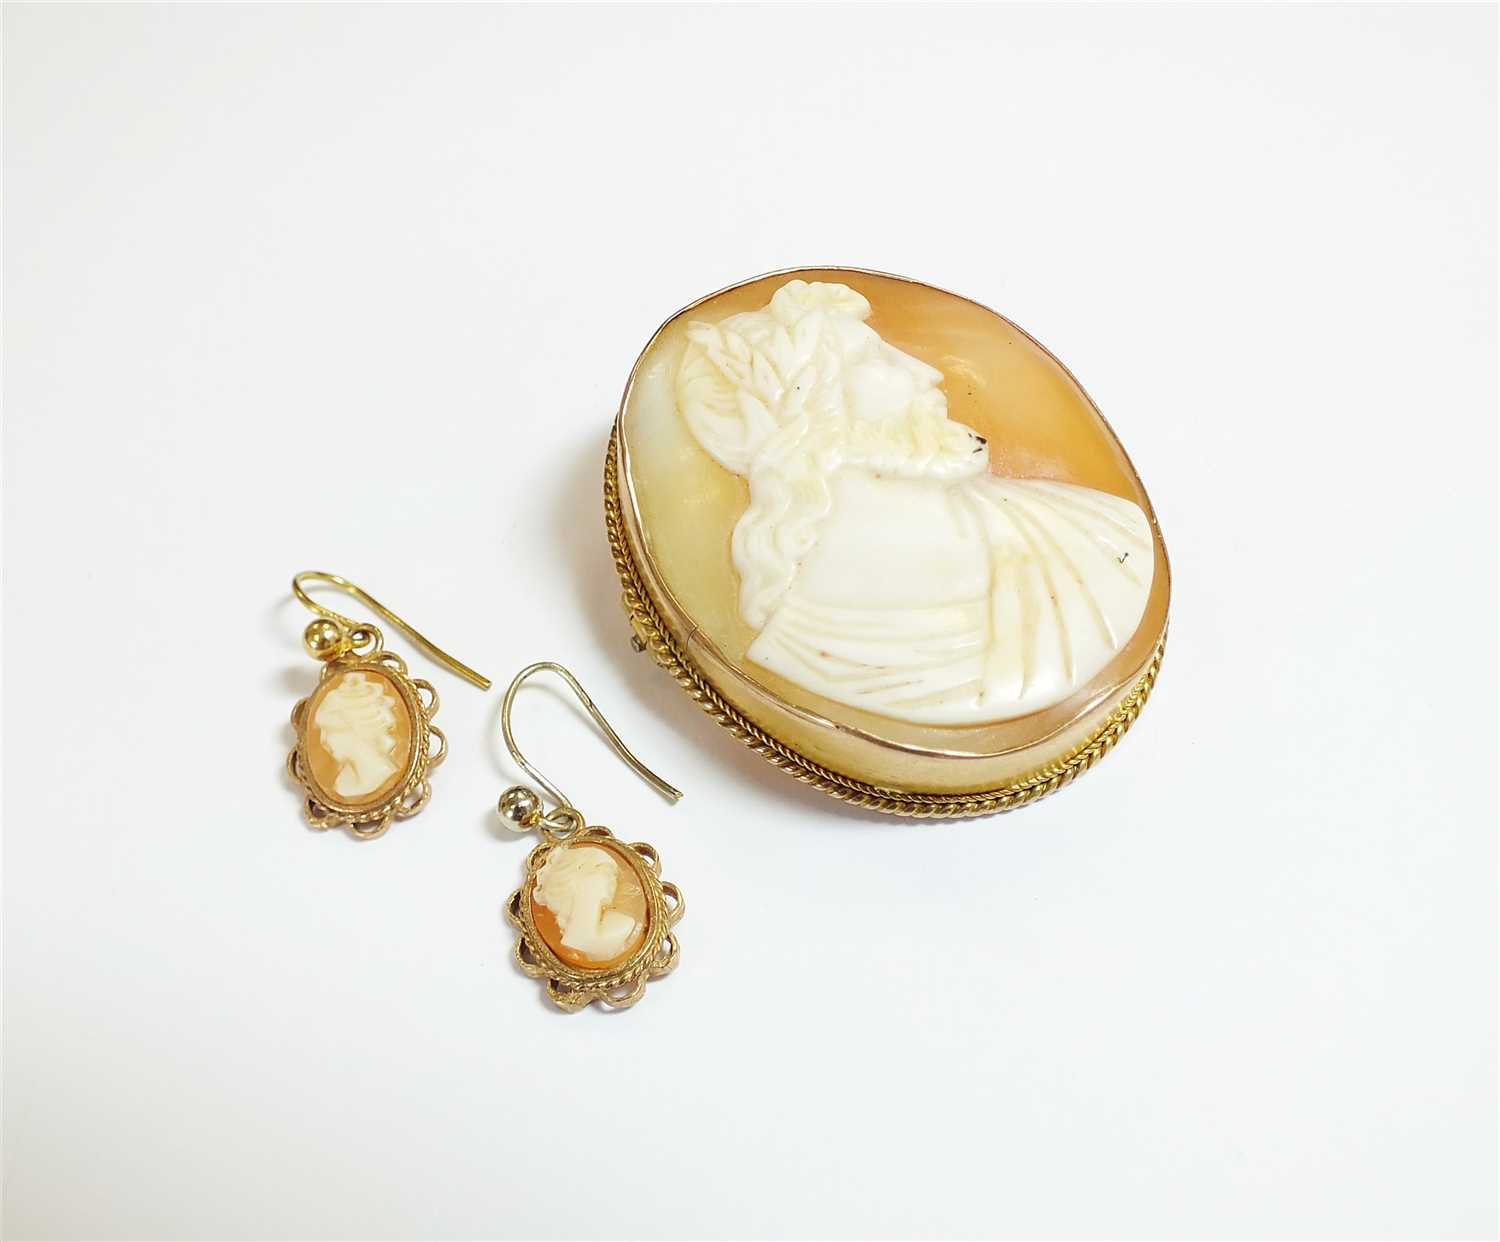 Lot 39 - A cameo brooch and earrings